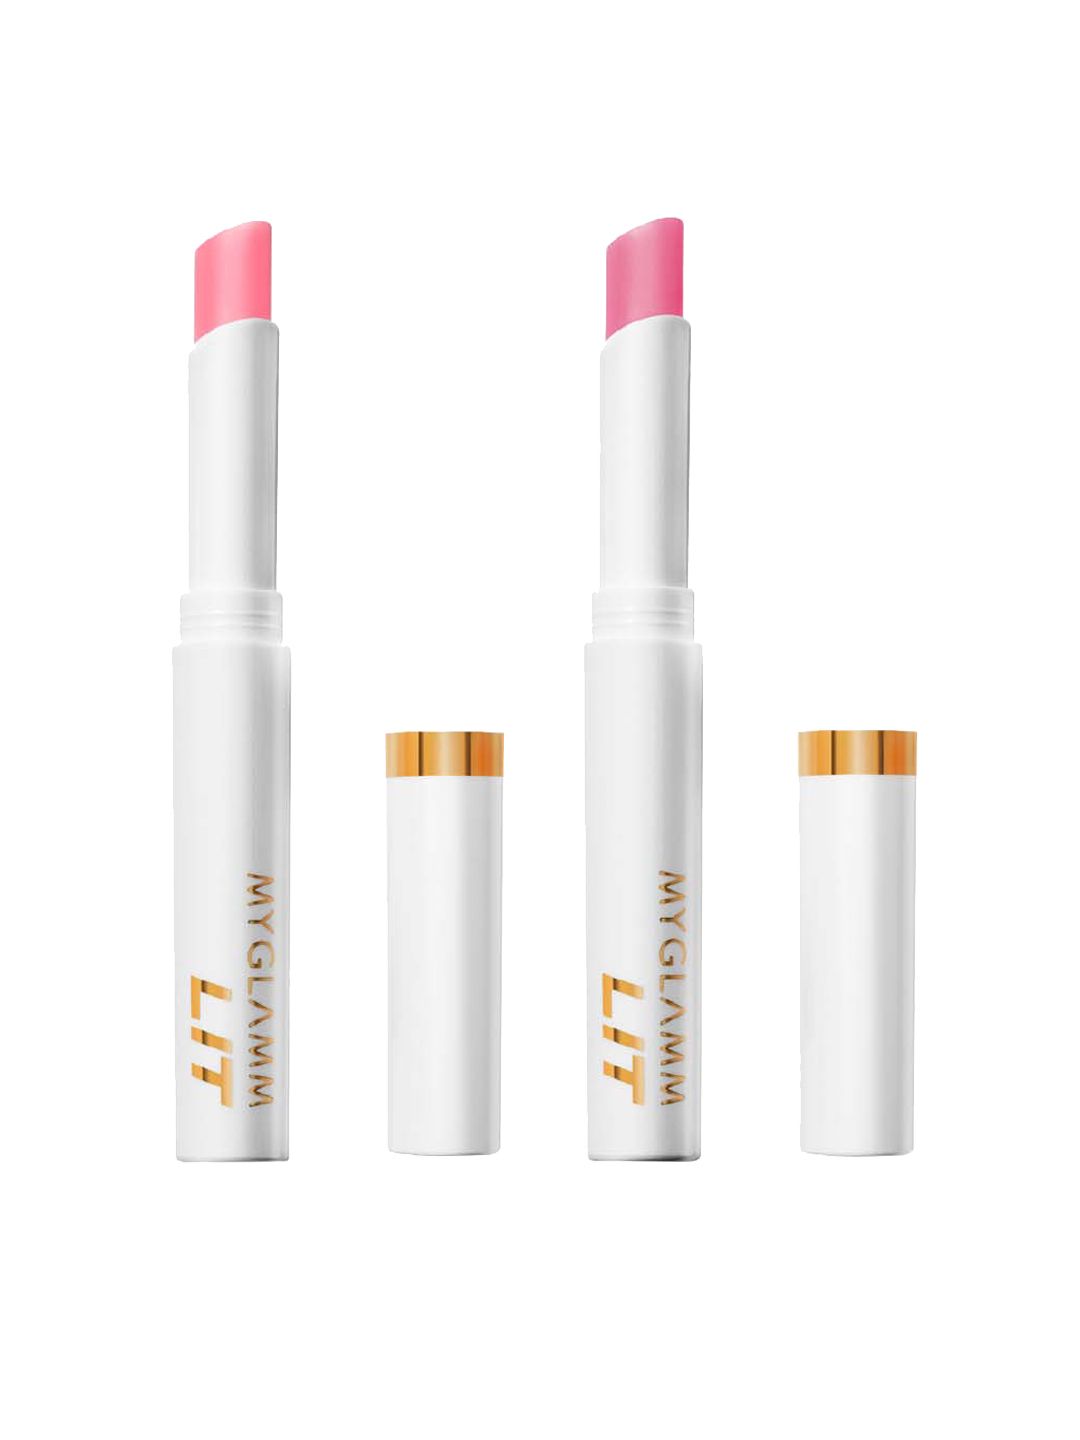 MyGlamm Set of 2 LIT PH Lip Balm 2 g Each - Bite Me & All Day Price in India